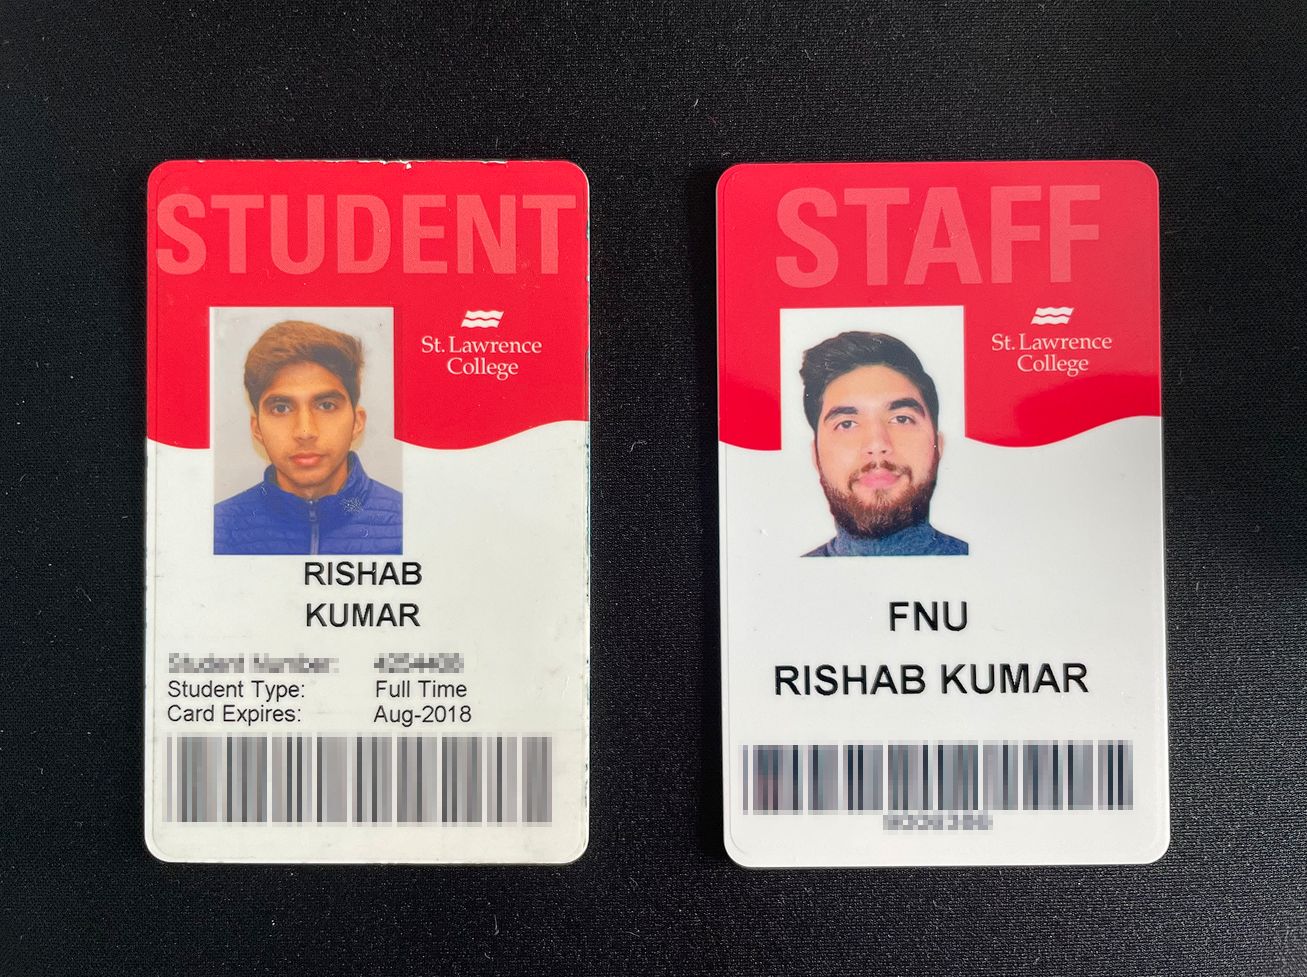 My student ID and Staff badge at the same college, student in 2018 and staff in 2022